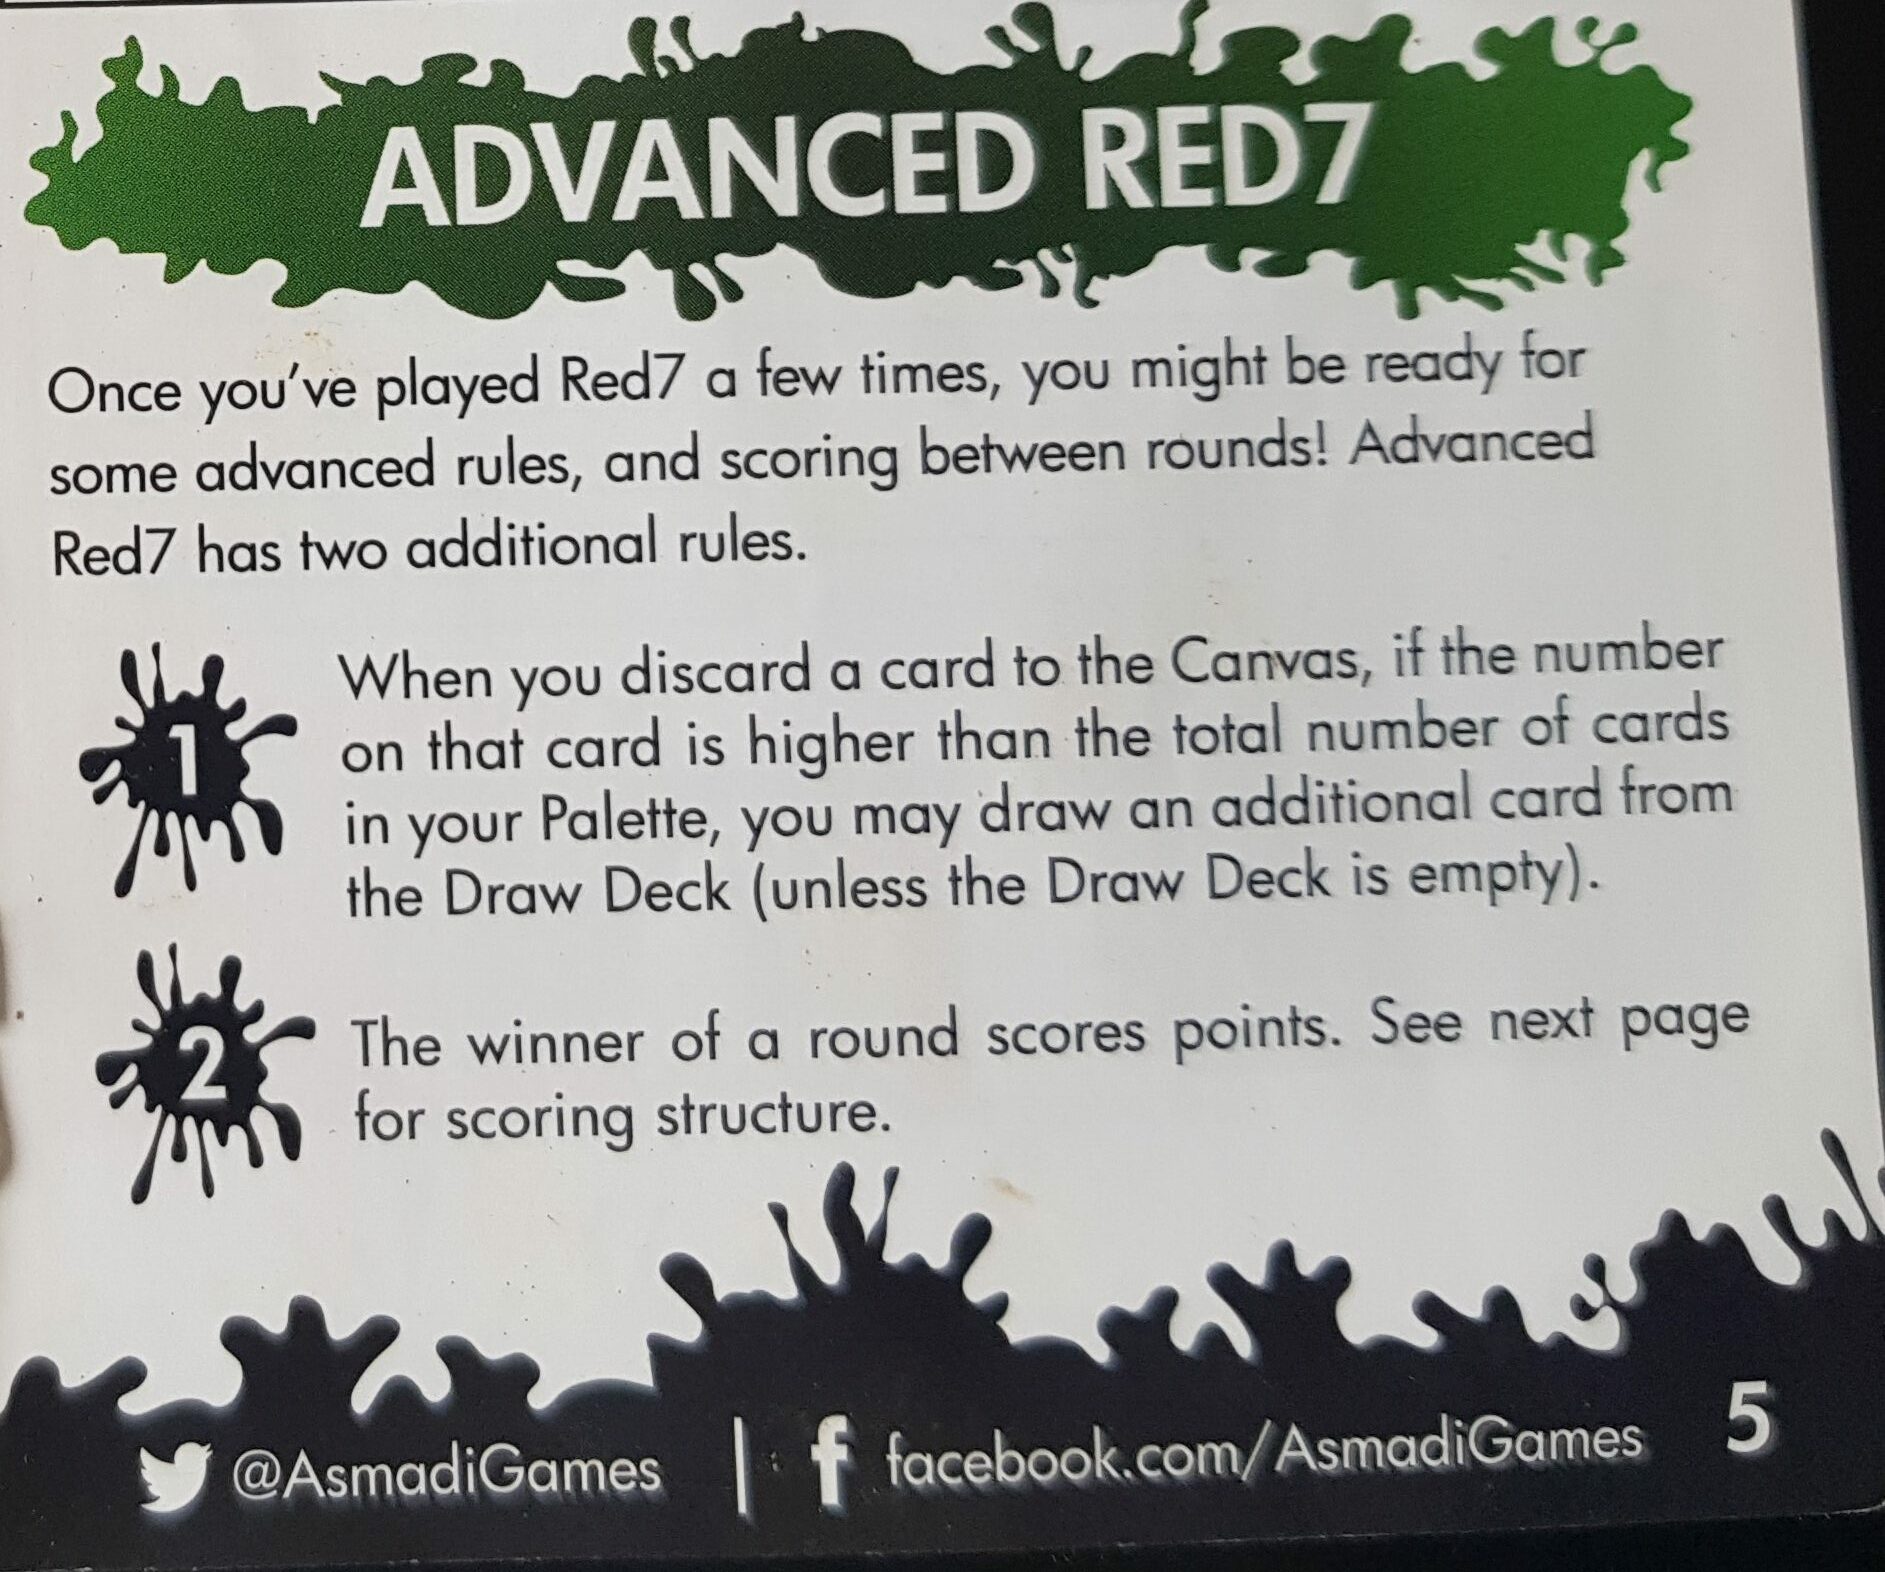 Extra rules for advanced Red7